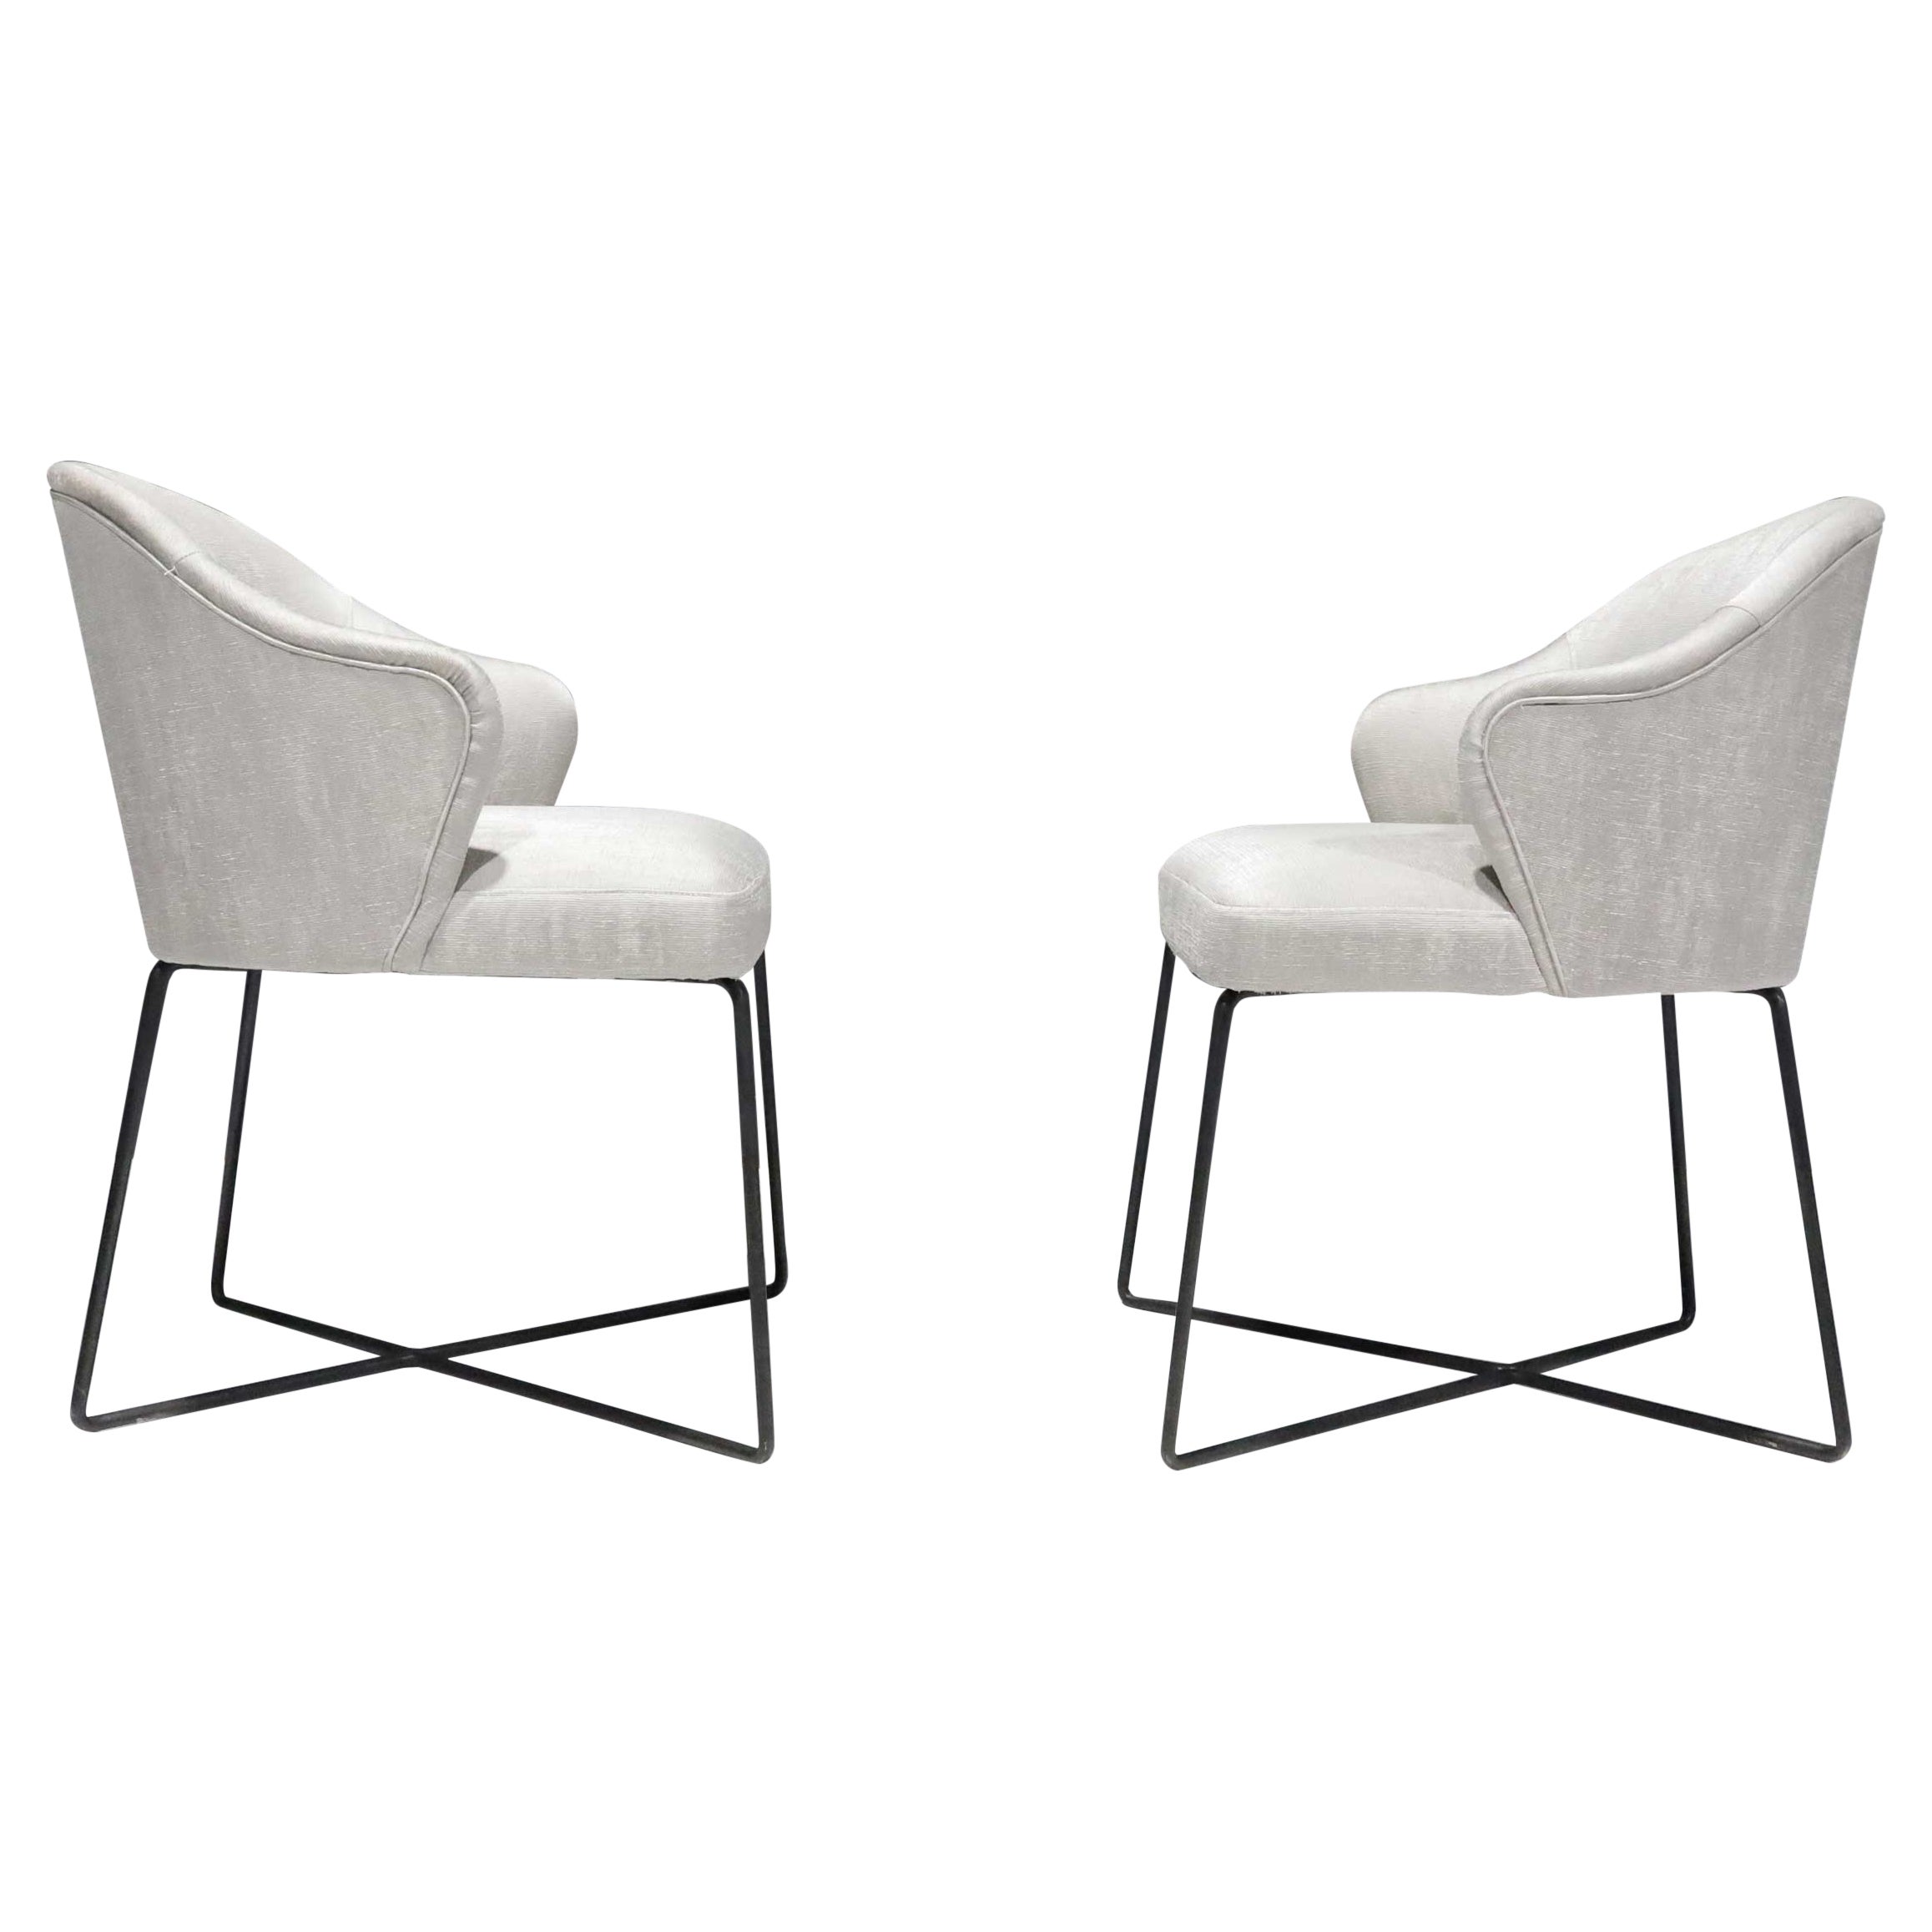 Pair of Rodolfo Dordoni for Minotti Leslie Dining or Side Chairs